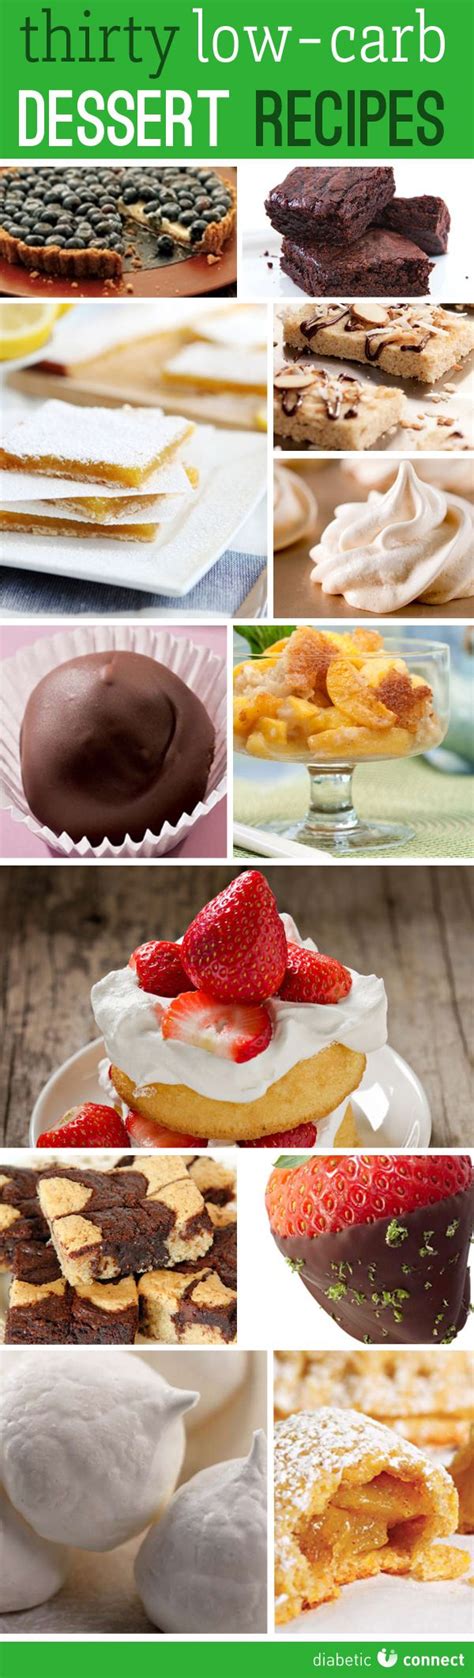 These cakes, cookies, ice creams, and brownies are made with sugar substitutes and all the creamy good stuff you 1 of 35. Most Popular Low Carb Desserts - Page 4 - Weight Loss ...